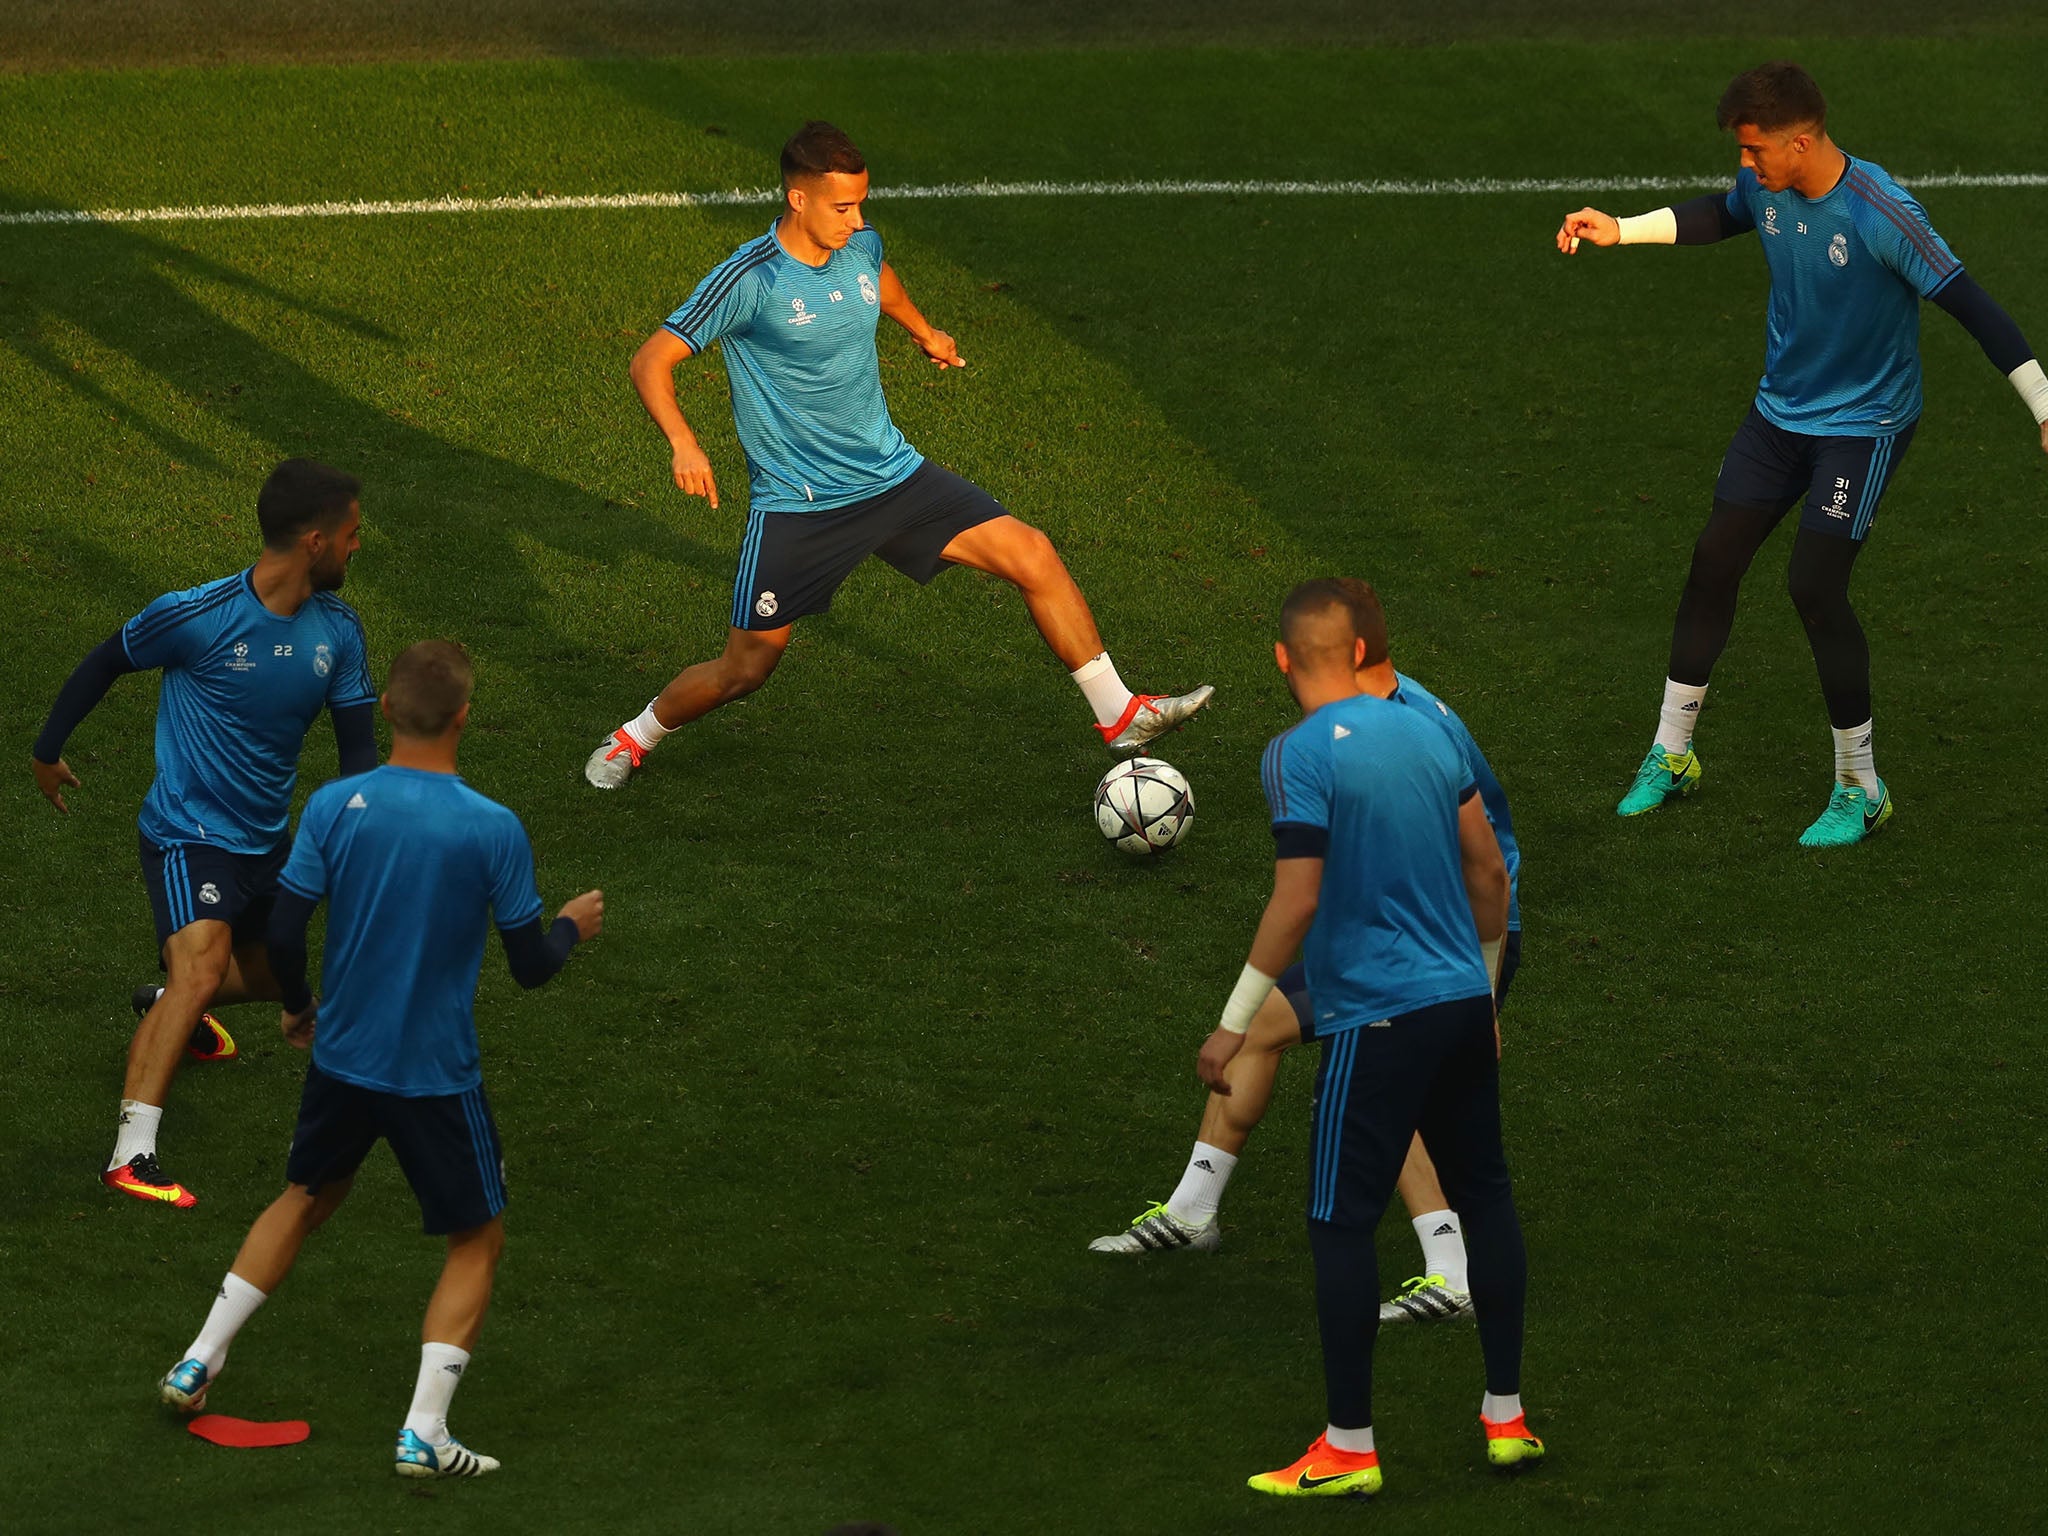 Real Madrid players warming up ahead of the Champions League final at the San Siro stadium in Milan